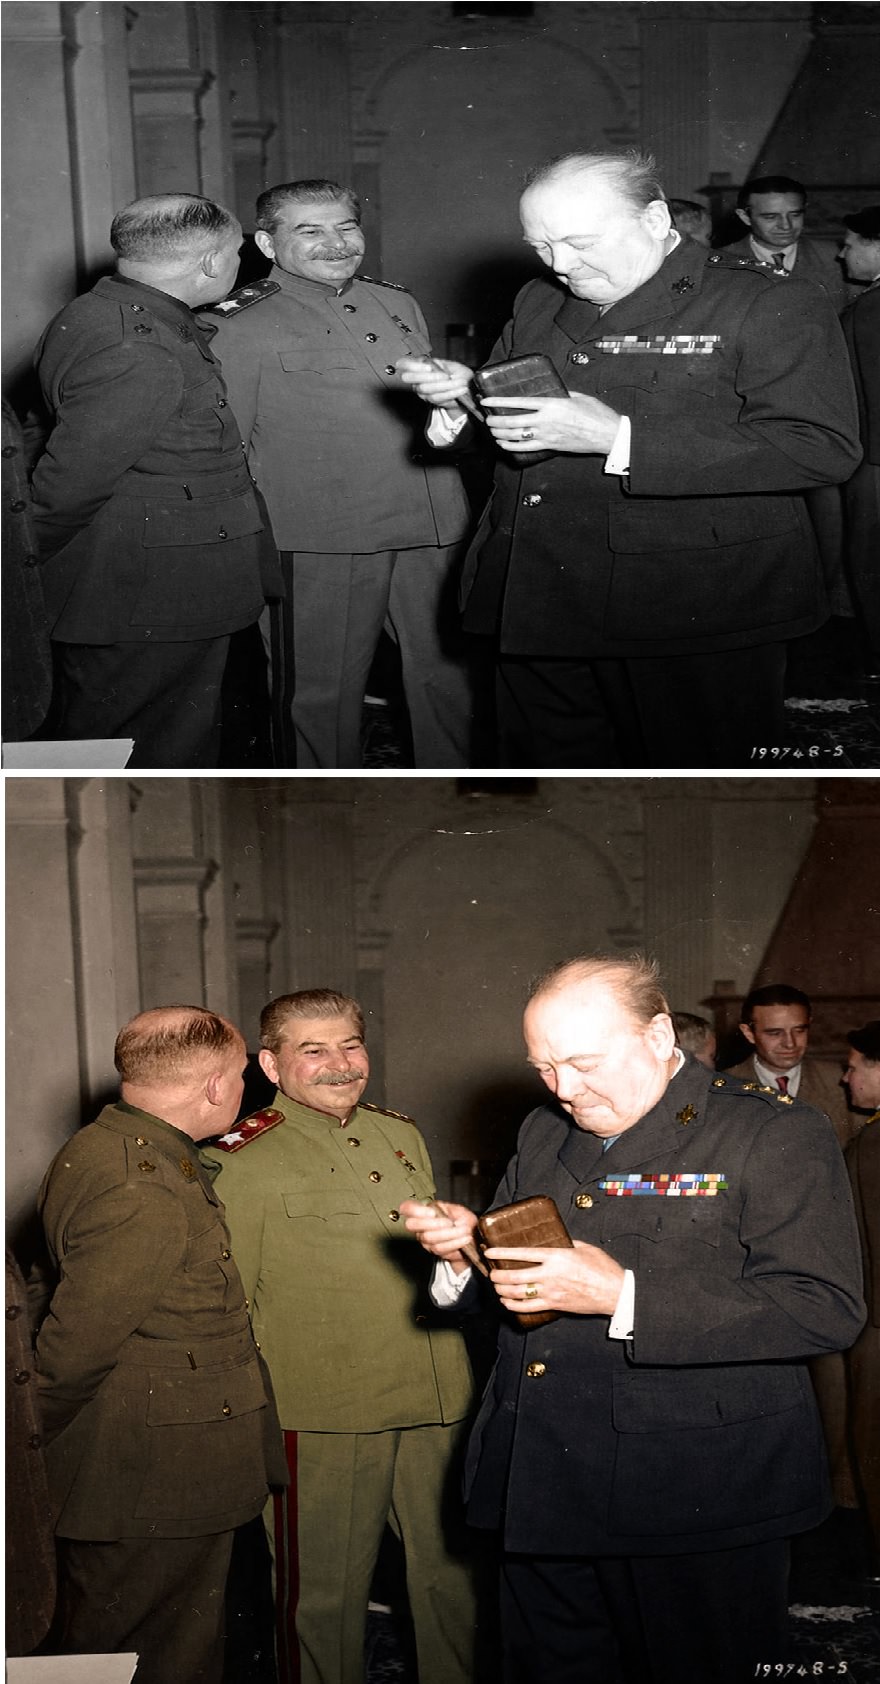 Stalin and Churchill in Livadia Palace during the Yalta Conference, February, 1945